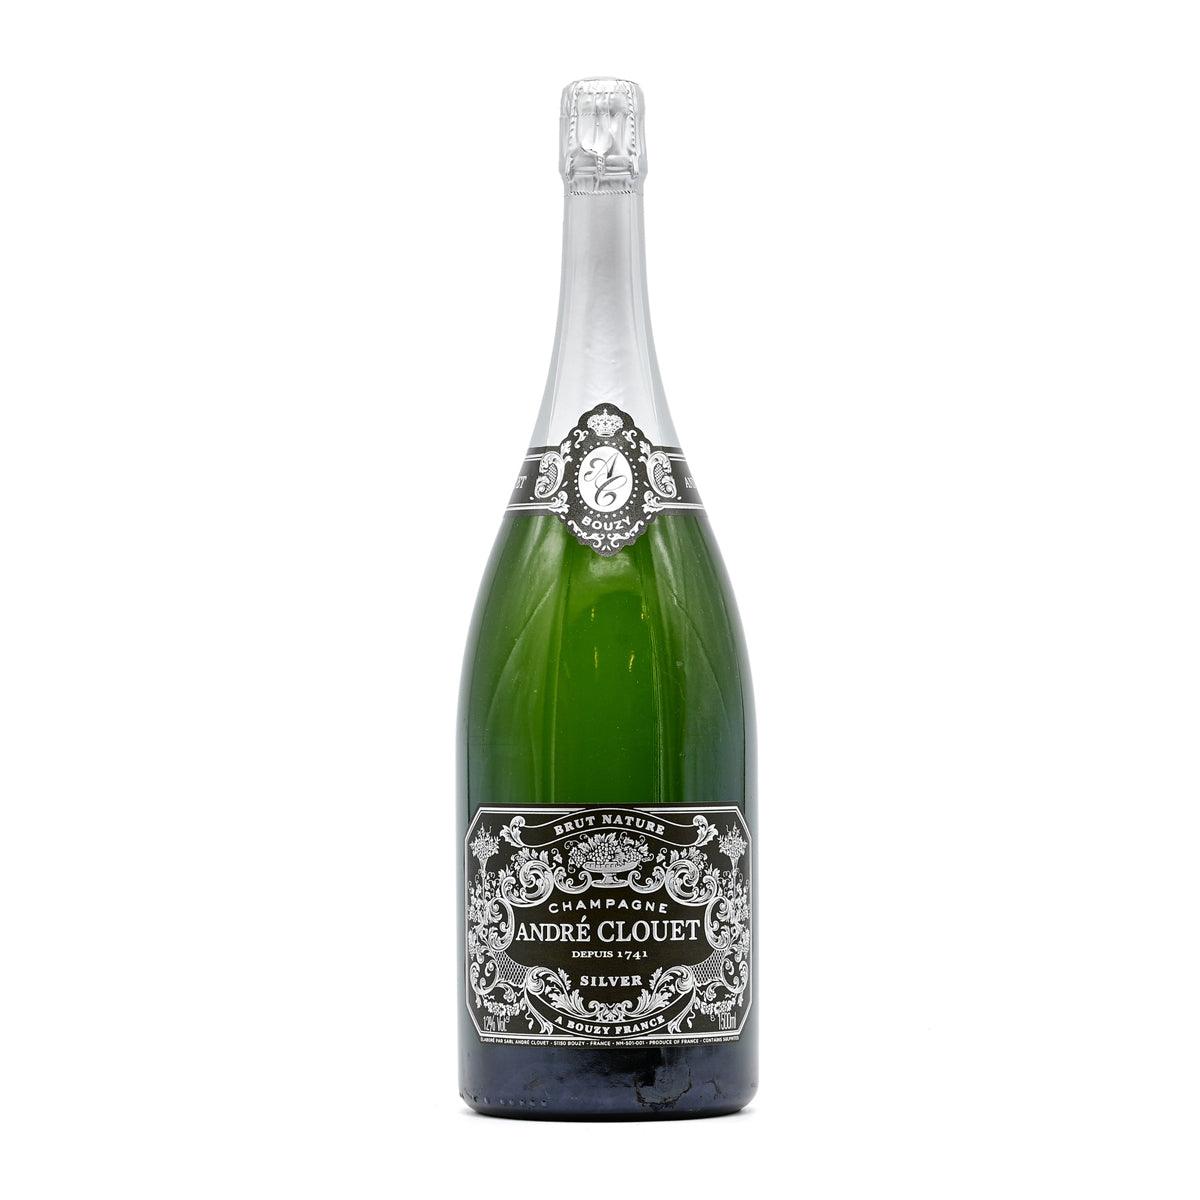 Andre Clouet Champagne Brut Silver NV (1.5L) - Champagne - GDV Fine Wines® - 1500ml, AG91, Bouzy, Champagne, Champagne Andre Clouet, France, JS93, Non-Vintage, WA92+, Wine Product